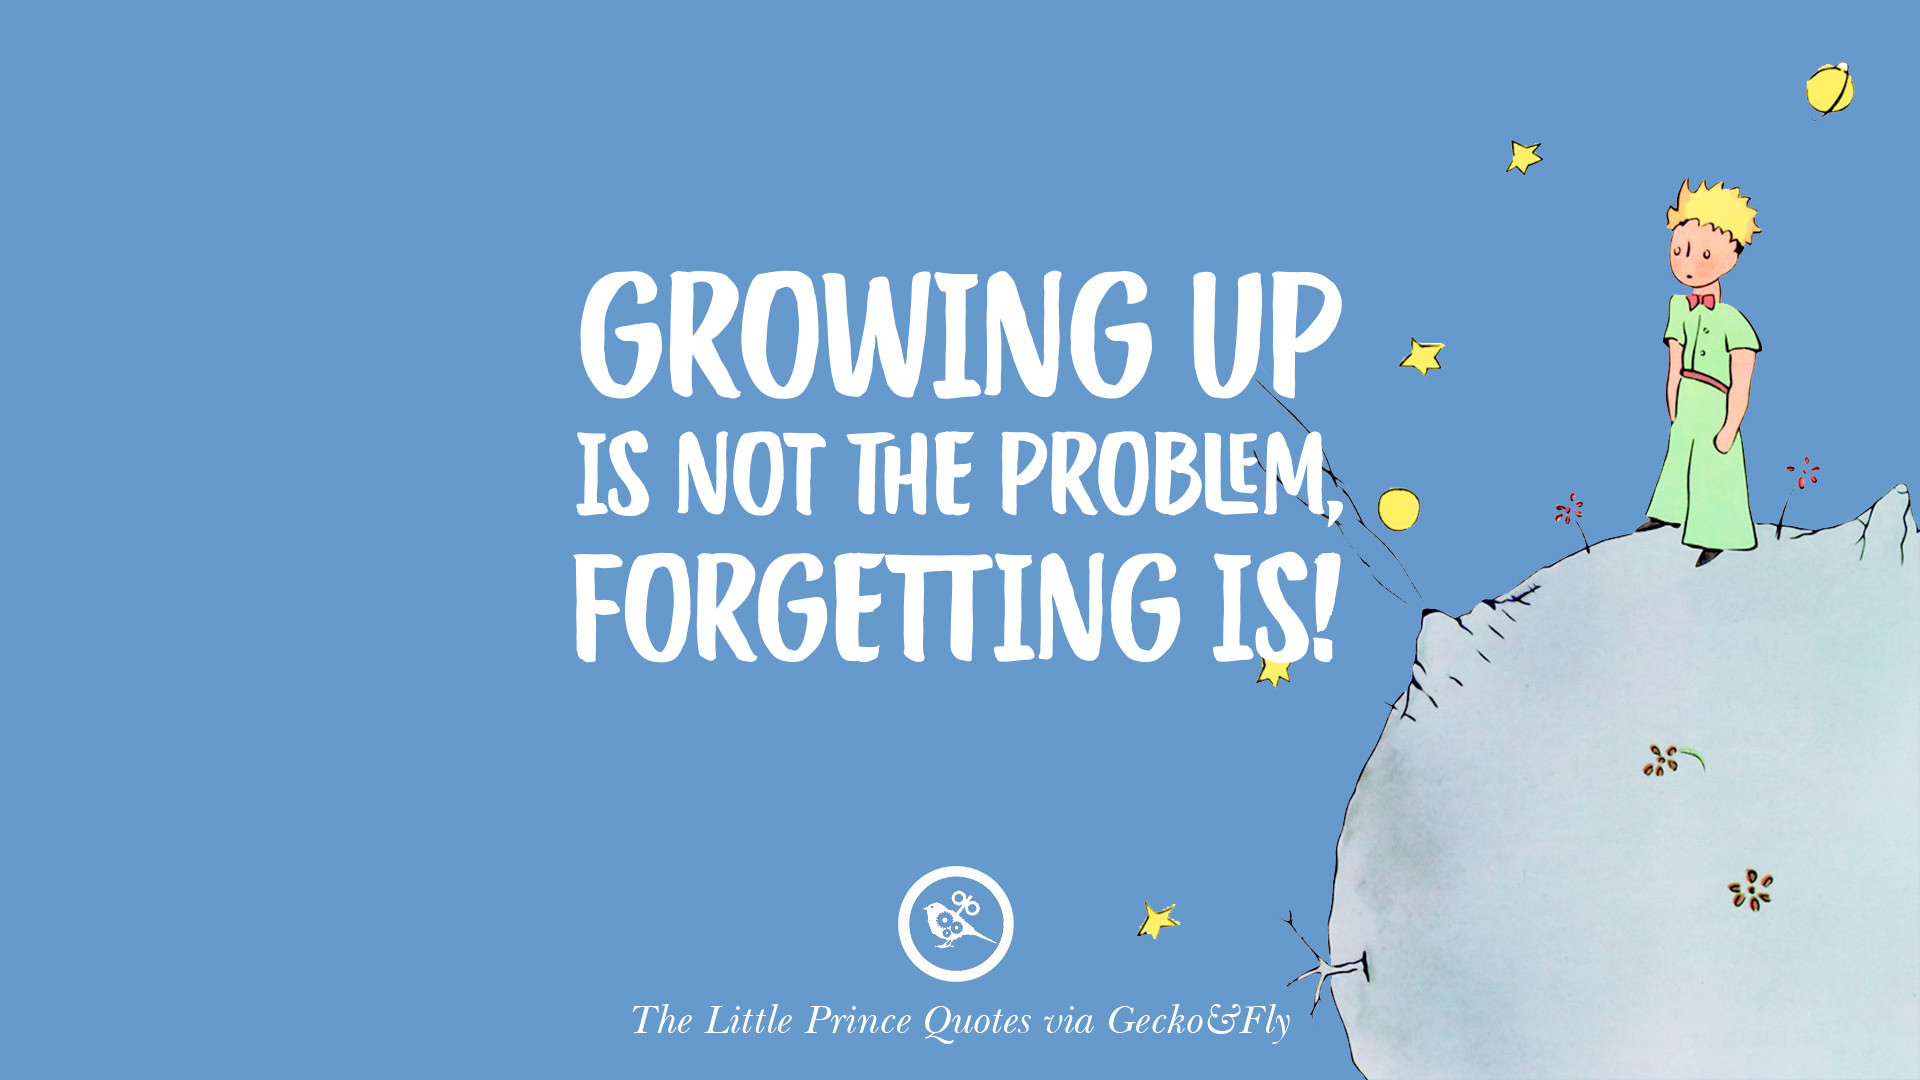 Growing up is not the problem, forgetting is!